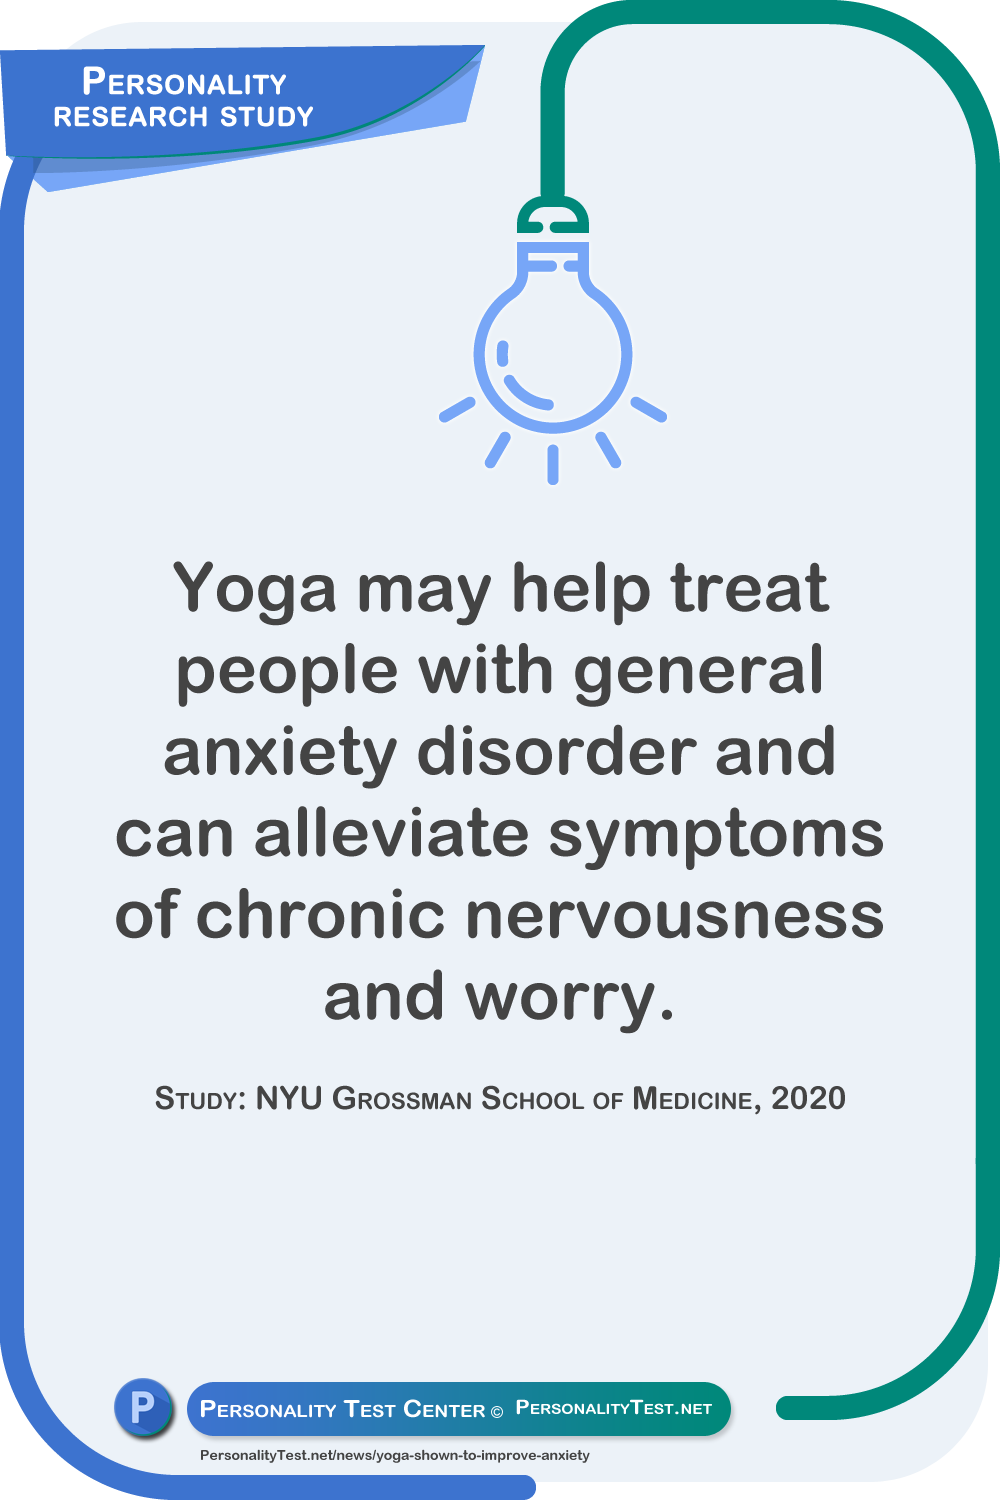 Yoga may help treat people with general anxiety disorder and can alleviate symptoms of chronic nervousness and worry. Study: NYU Grossman School of Medicine, 2020